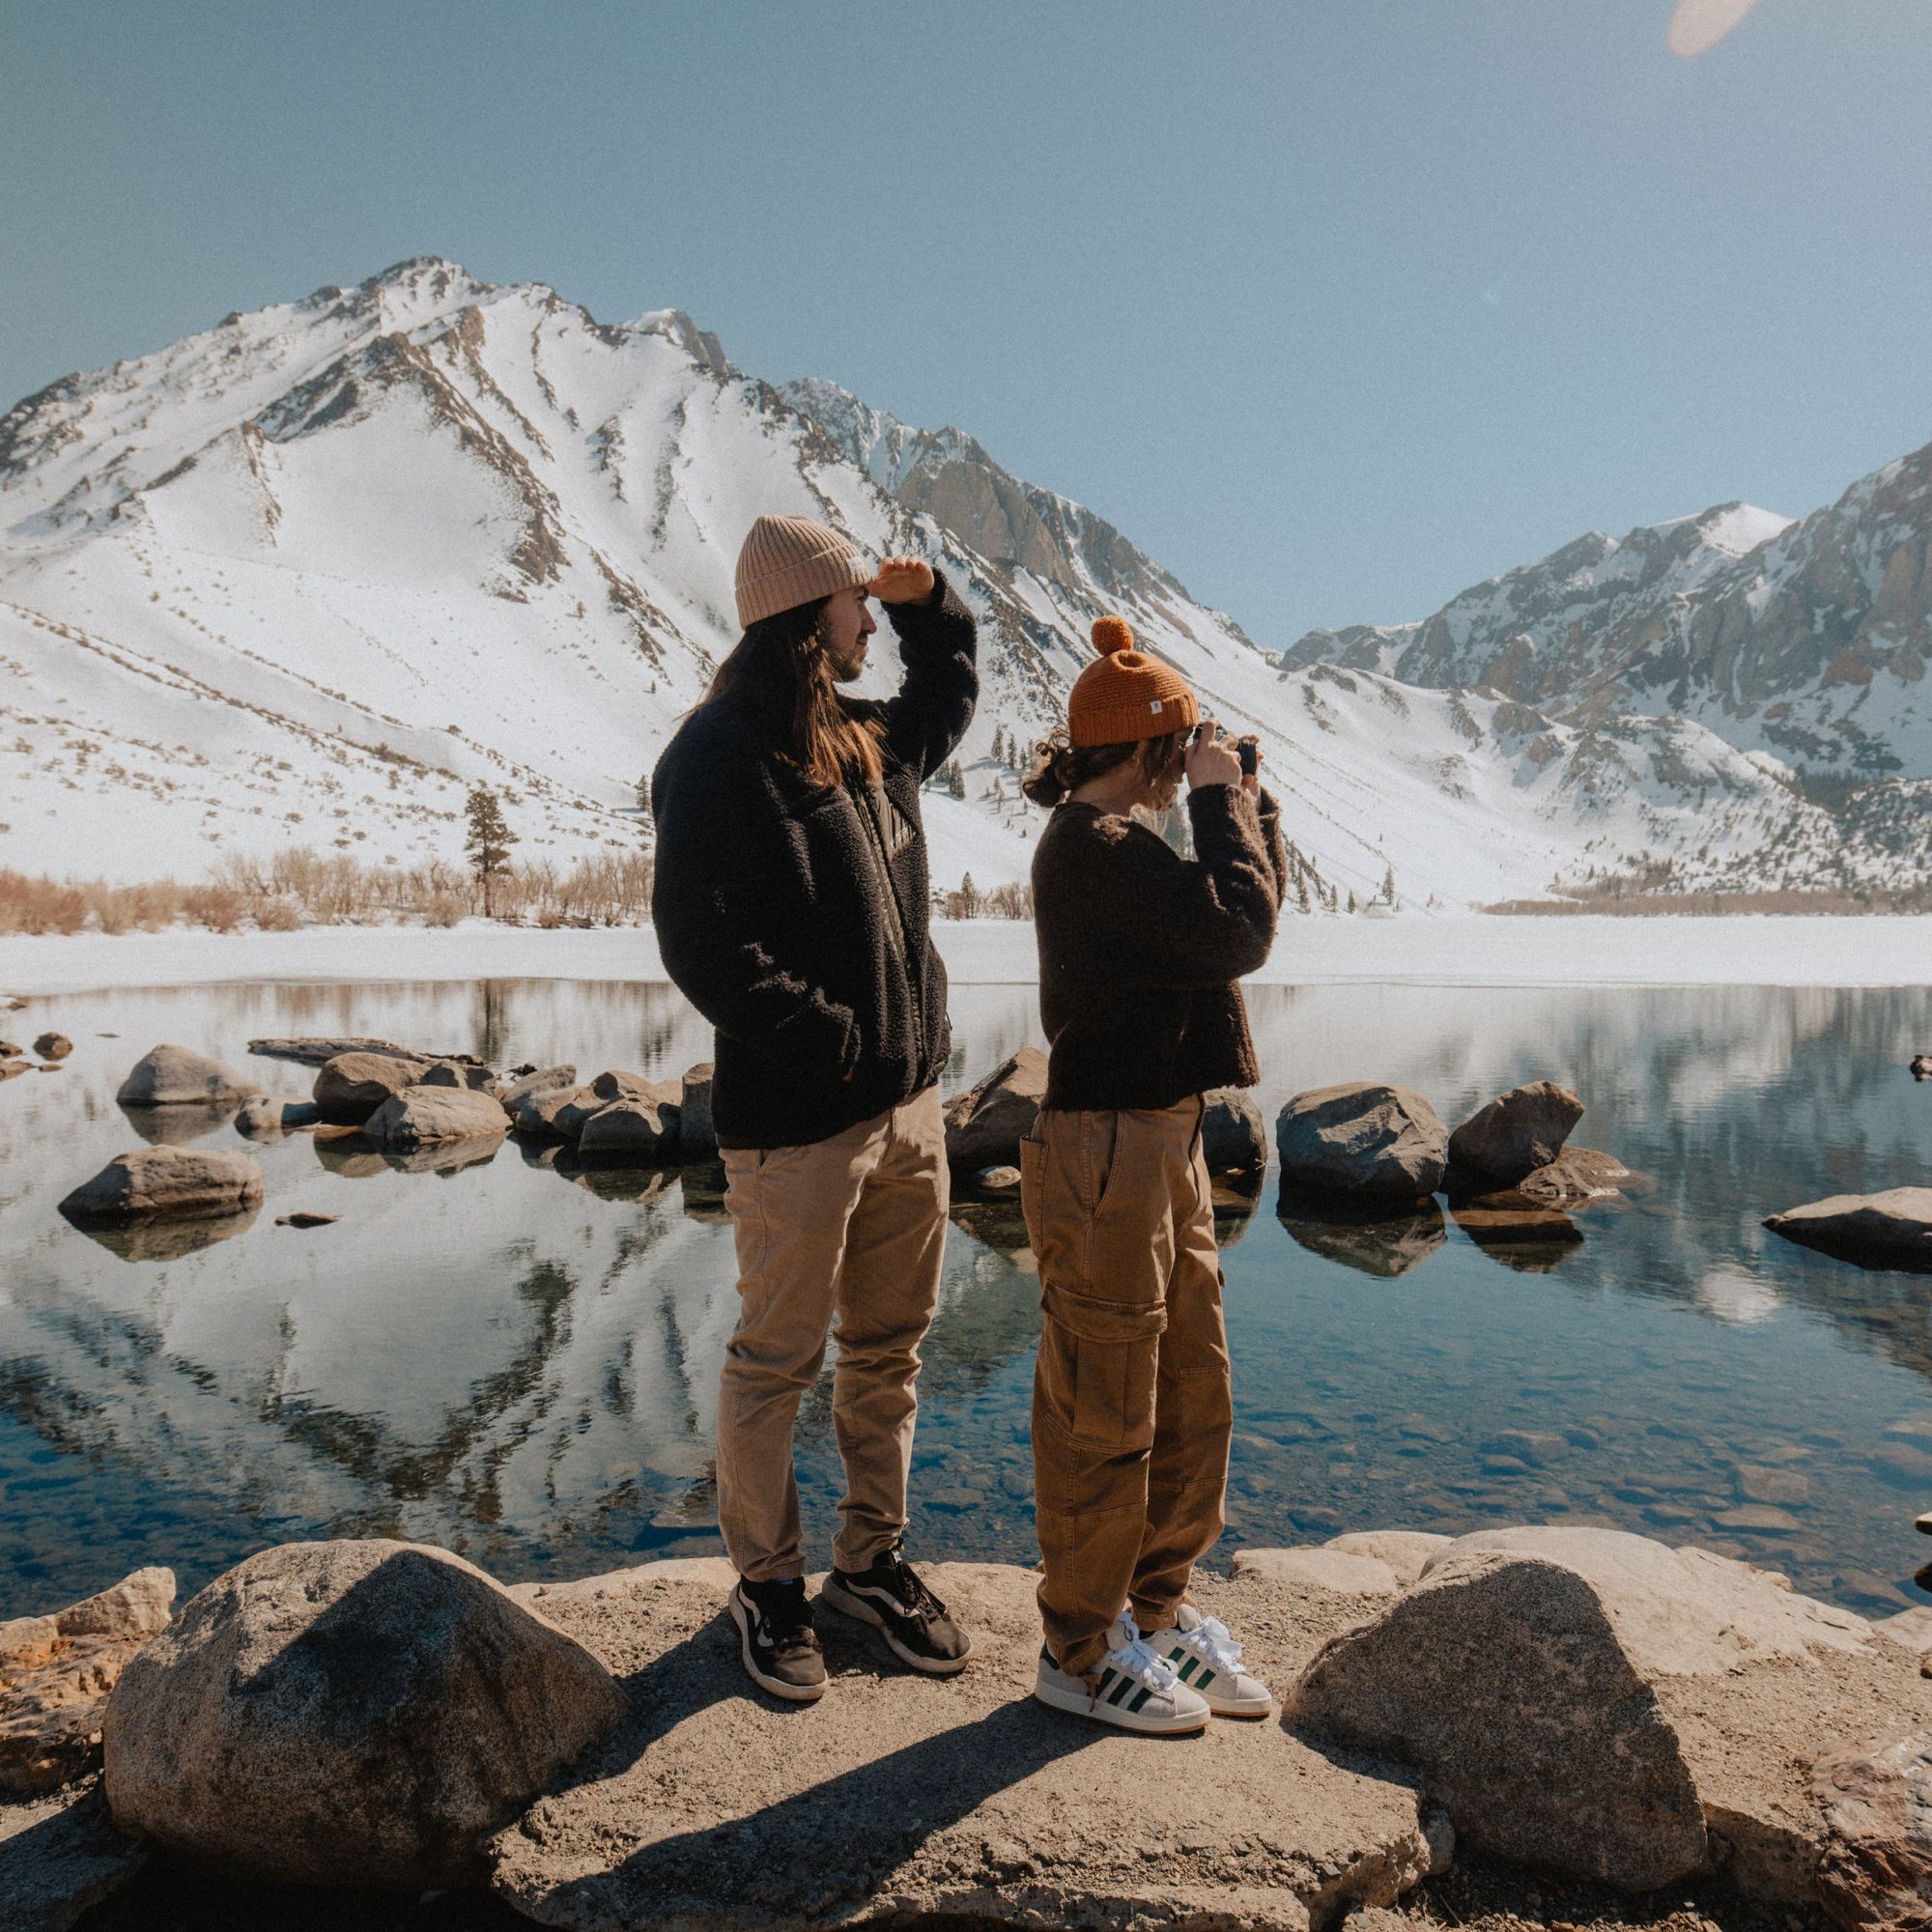 A man and a woman wearing beanies and taking photos at Convict Lake, California